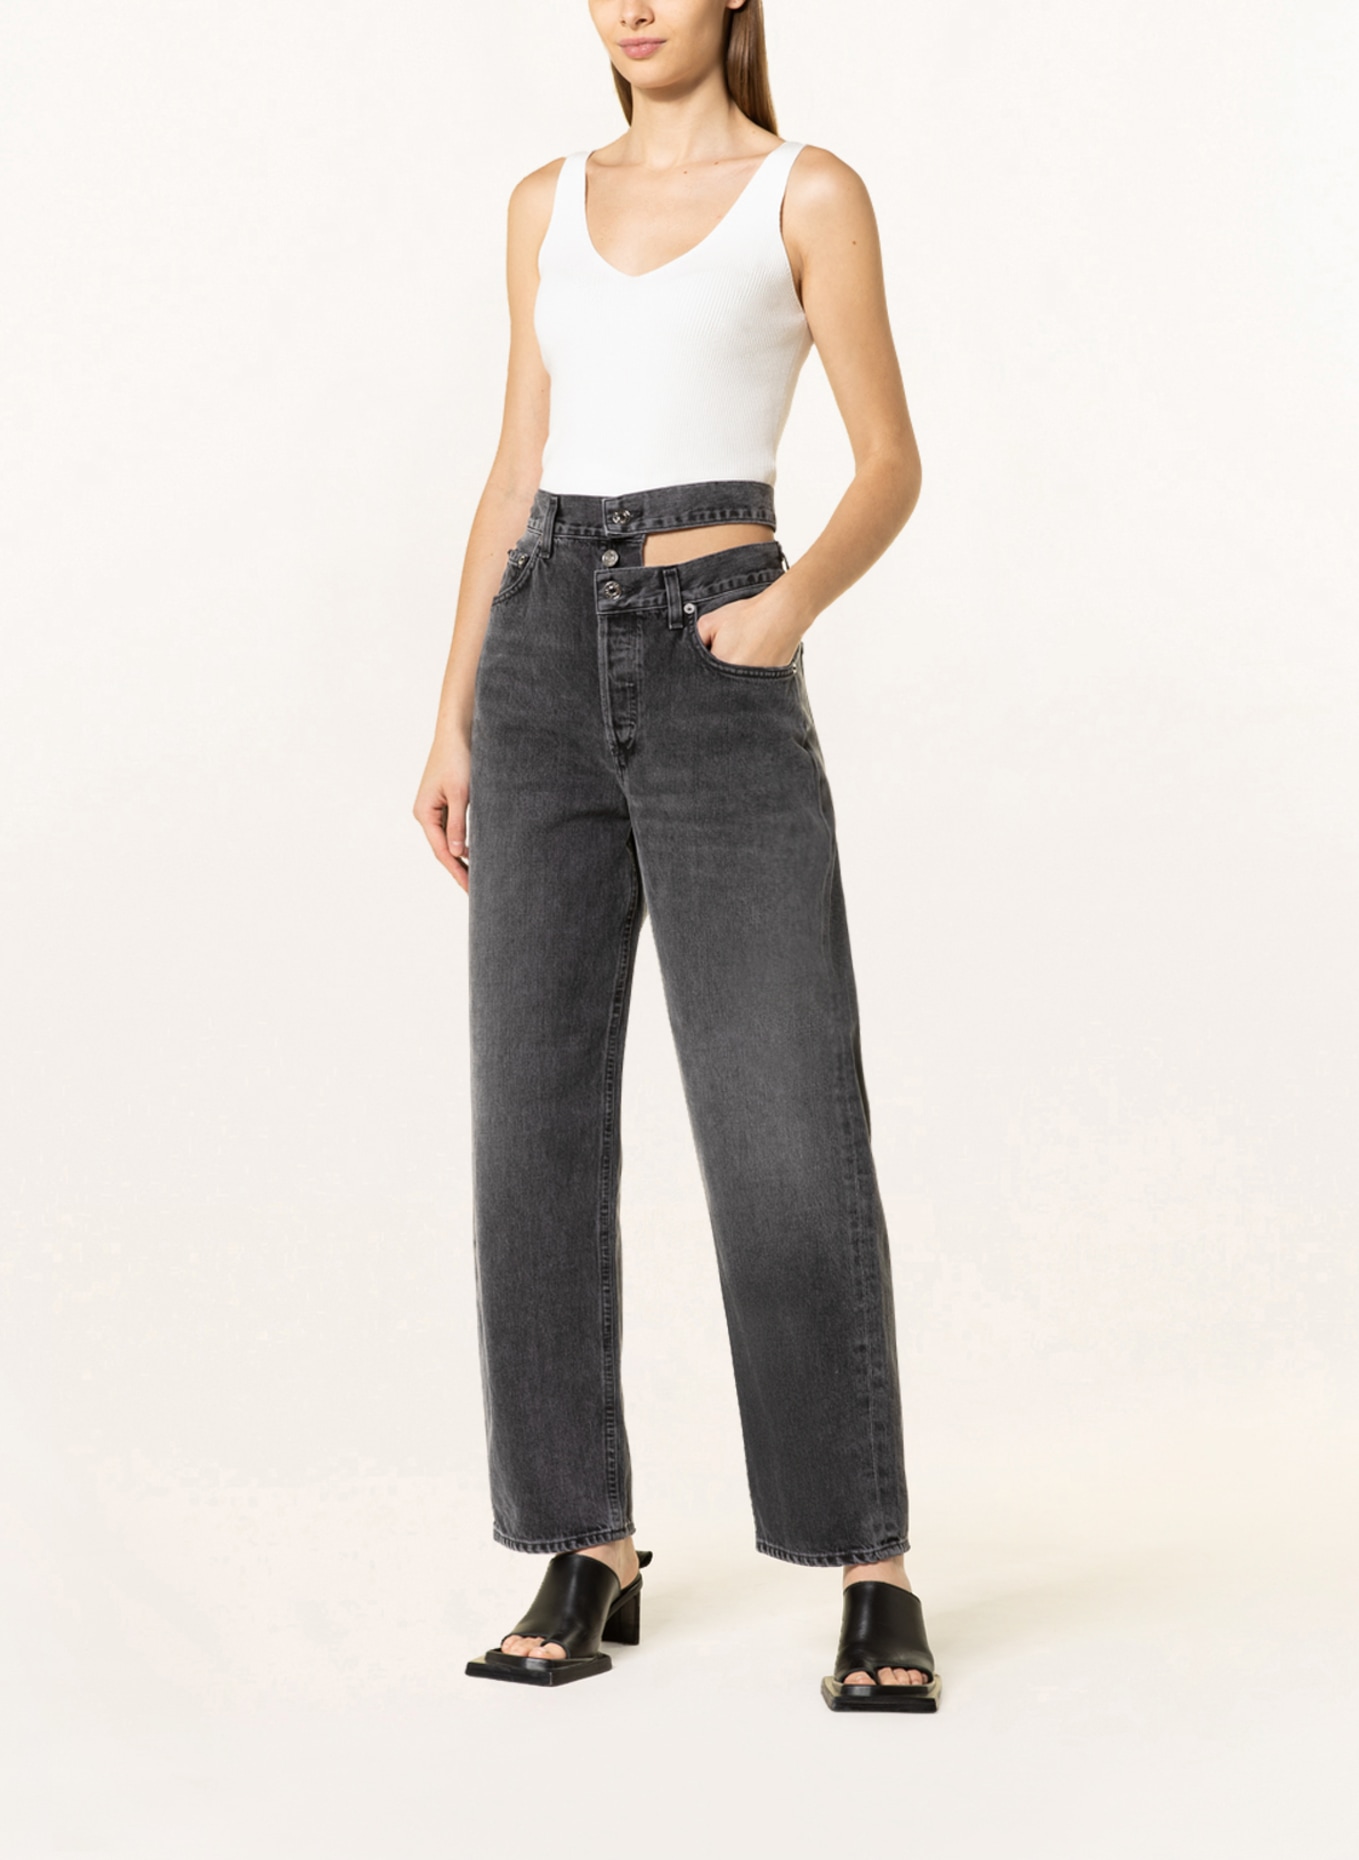 AGOLDE Straight Jeans JEAN mit Cut-out, Farbe: Conduct washed black (Bild 2)